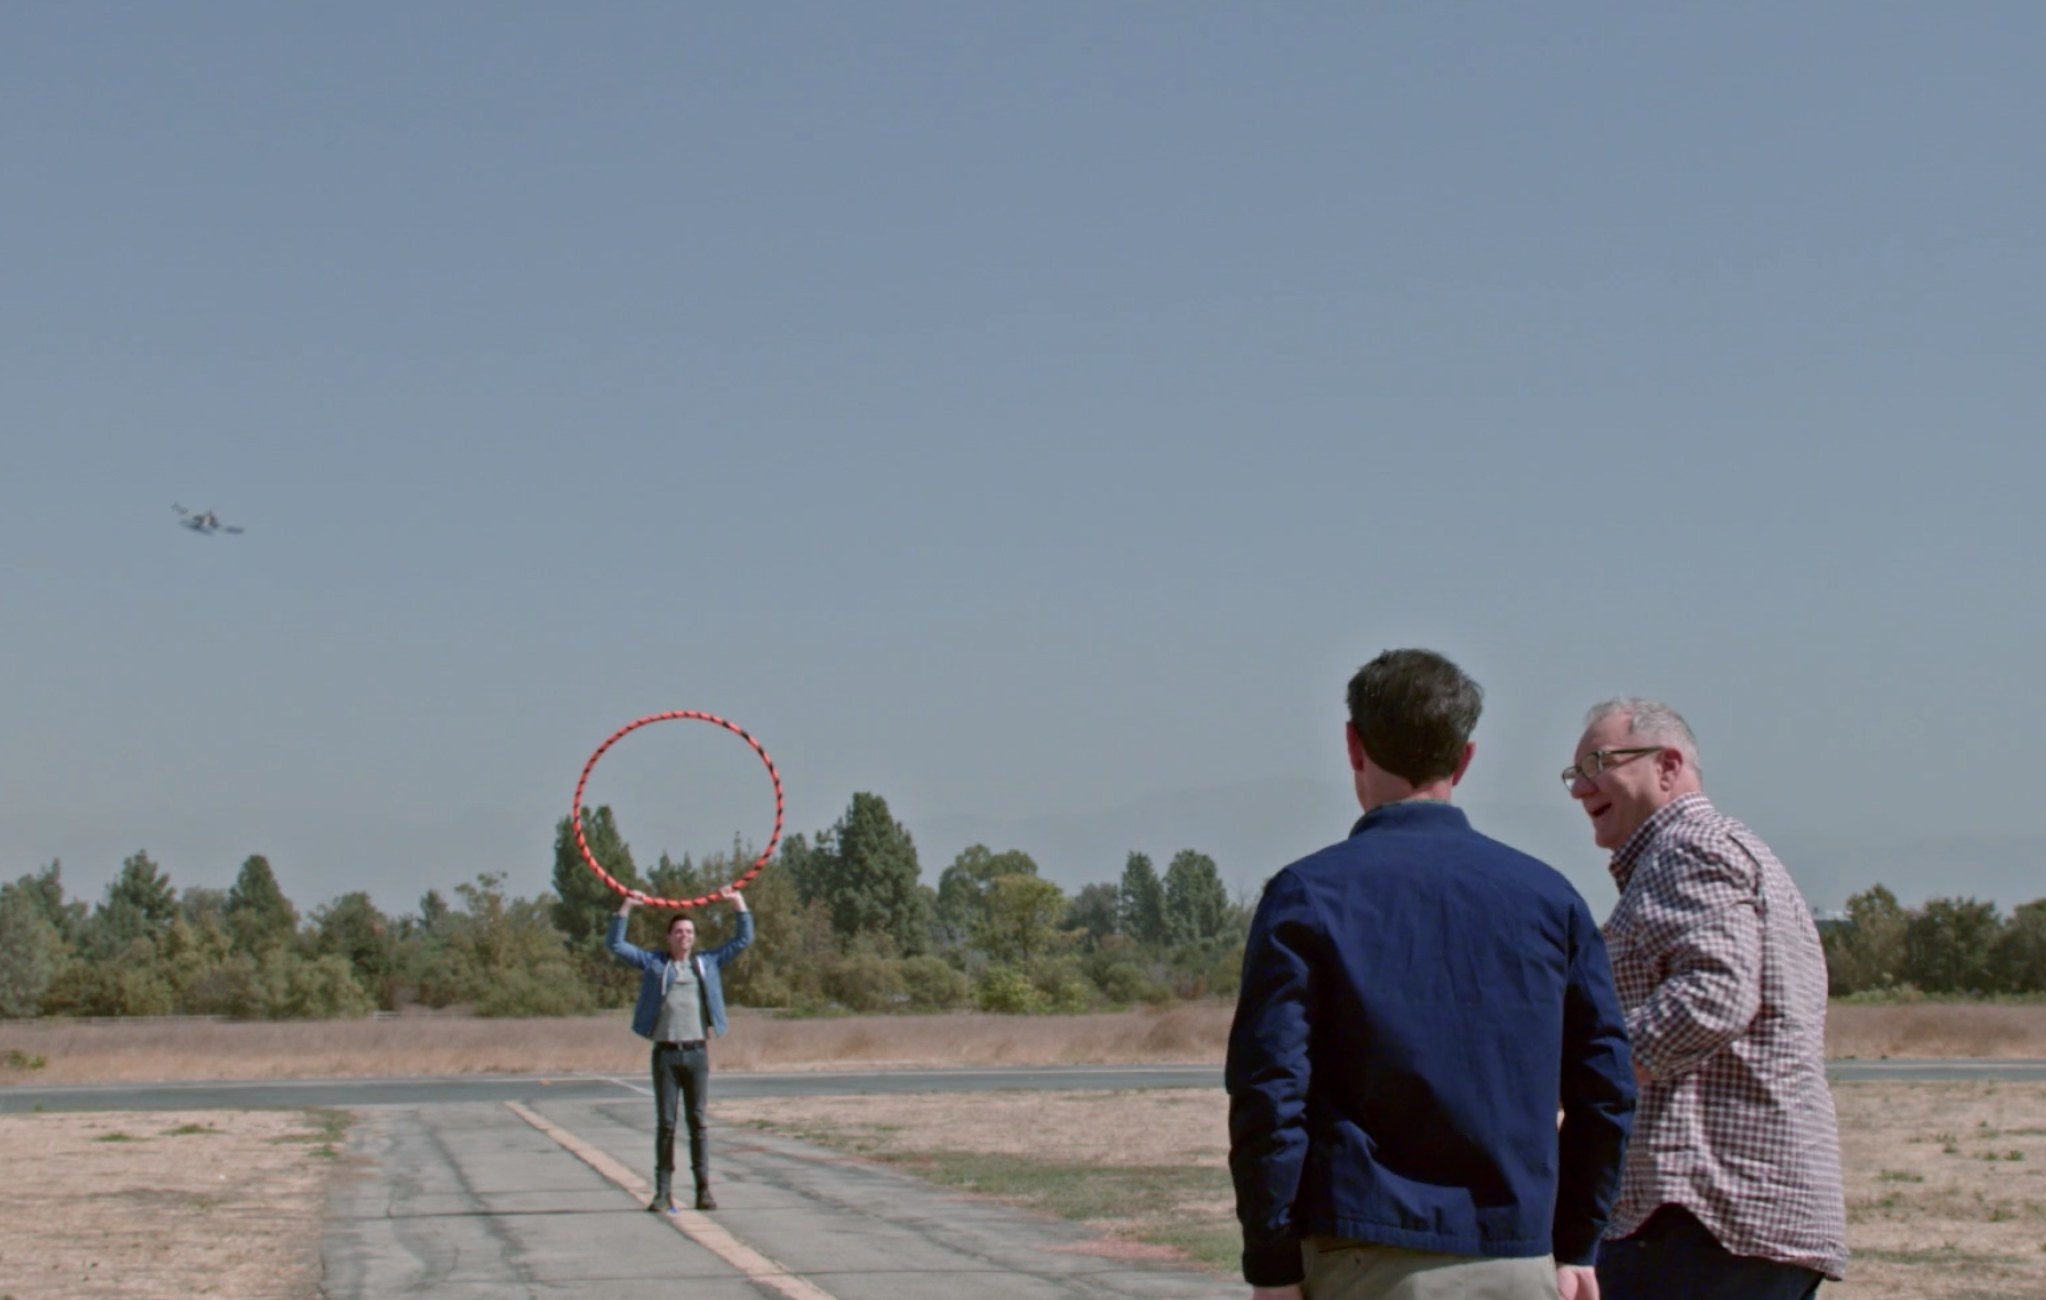 Dylan holding up a hoola hoop on a runway for Jay and Phil to fly the plane through